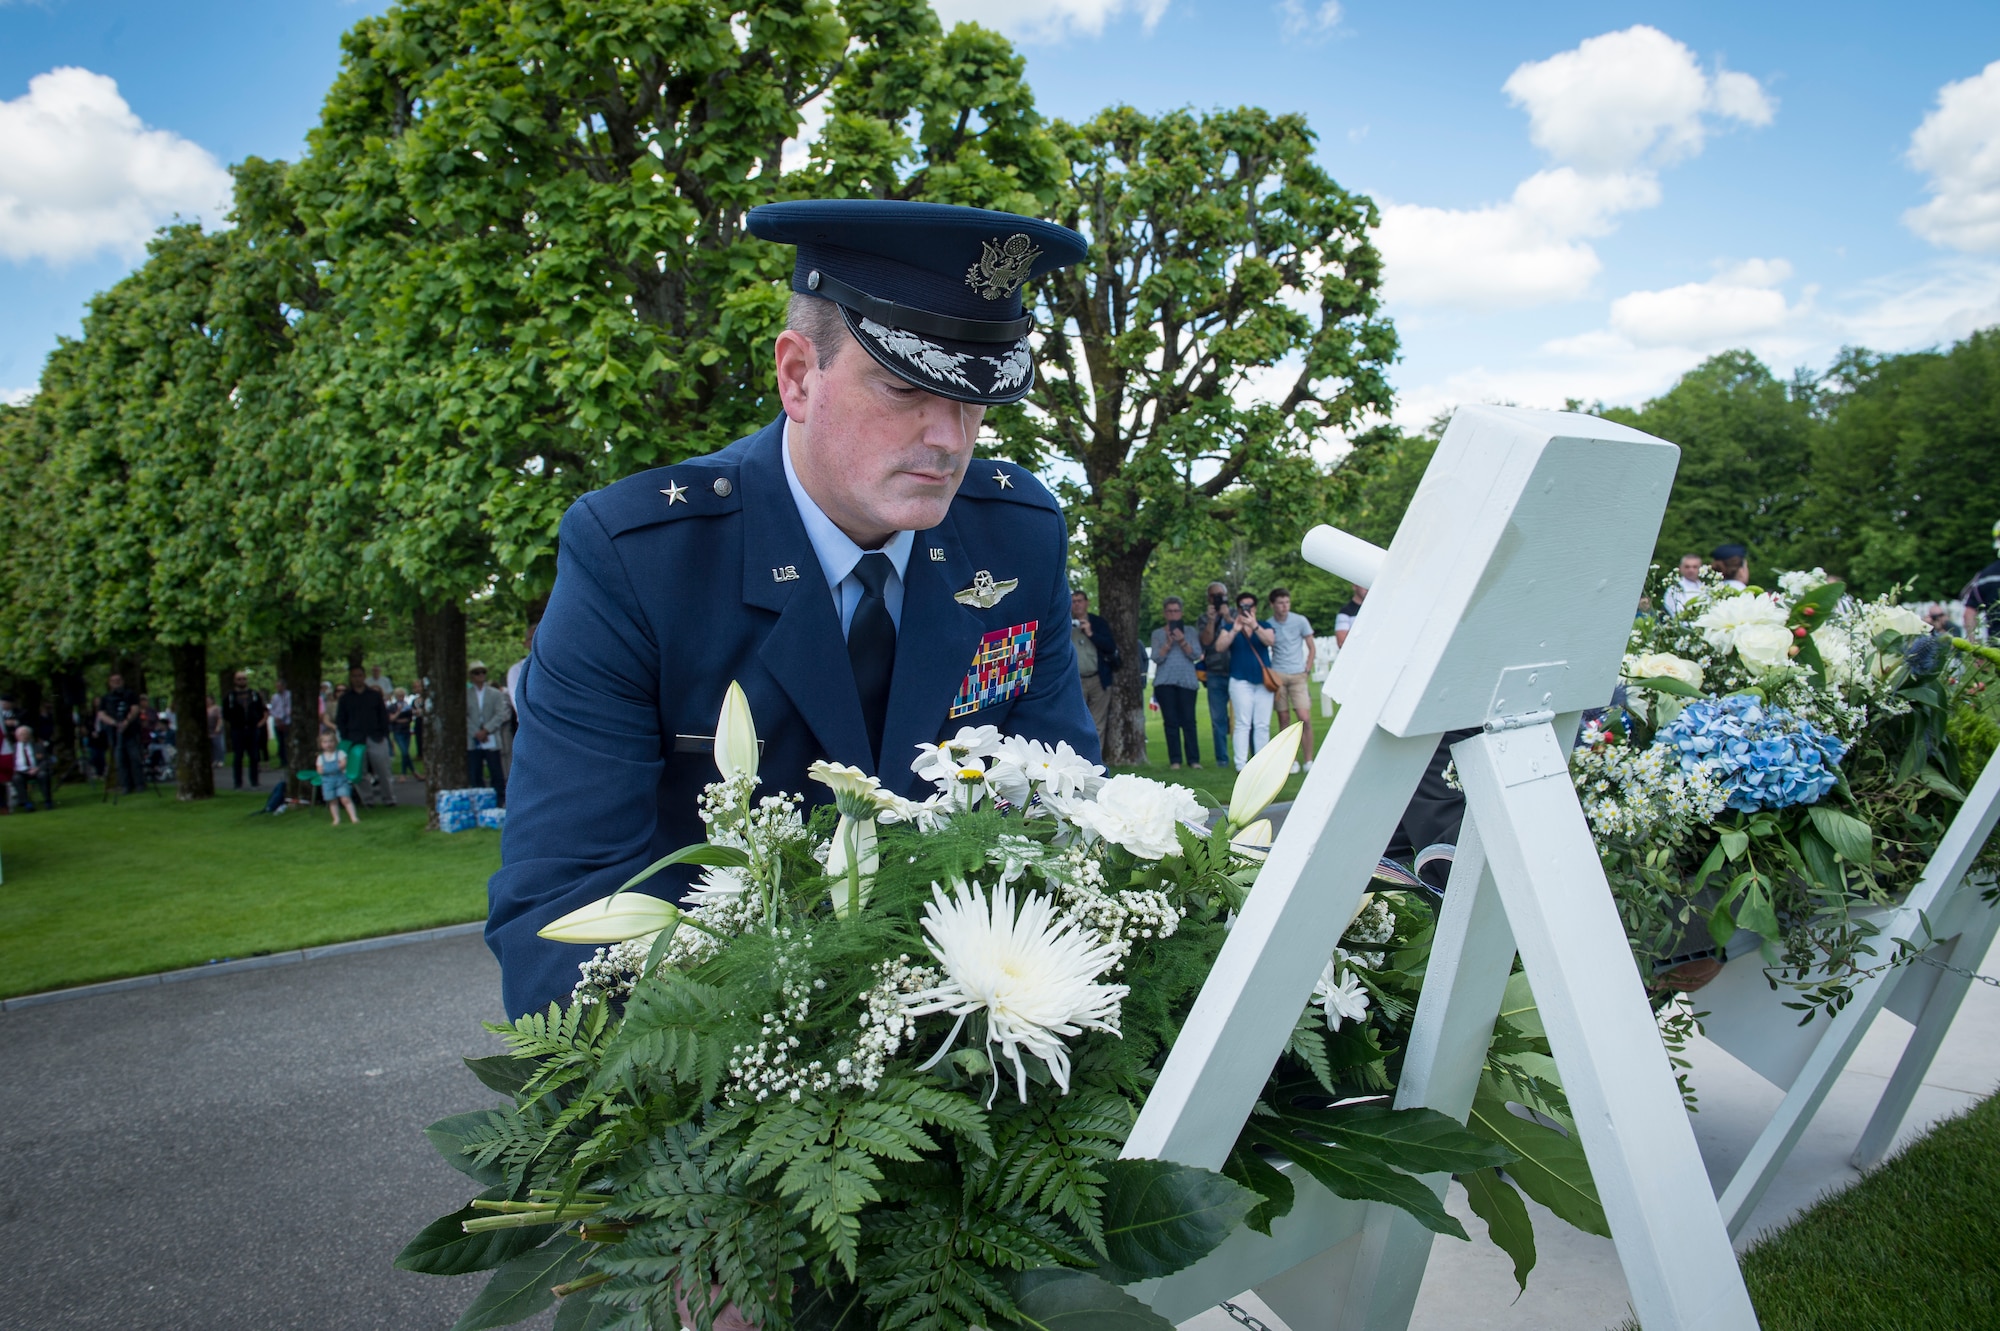 U.S. Air Force Brig. Gen. Mark R. August, 86th Airlift Wing commander, lays a wreath on a stand during a Memorial Day ceremony at the Saint-Mihiel American Cemetery, Thiaucourt-Regniéville, France, May 26, 2019. In addition to the more than 4,000 Americans who died and are buried there, the cemetery holds the names of 284 service members who are missing in action. (U.S. Air Force photo by Staff Sgt. Jonathan Bass)